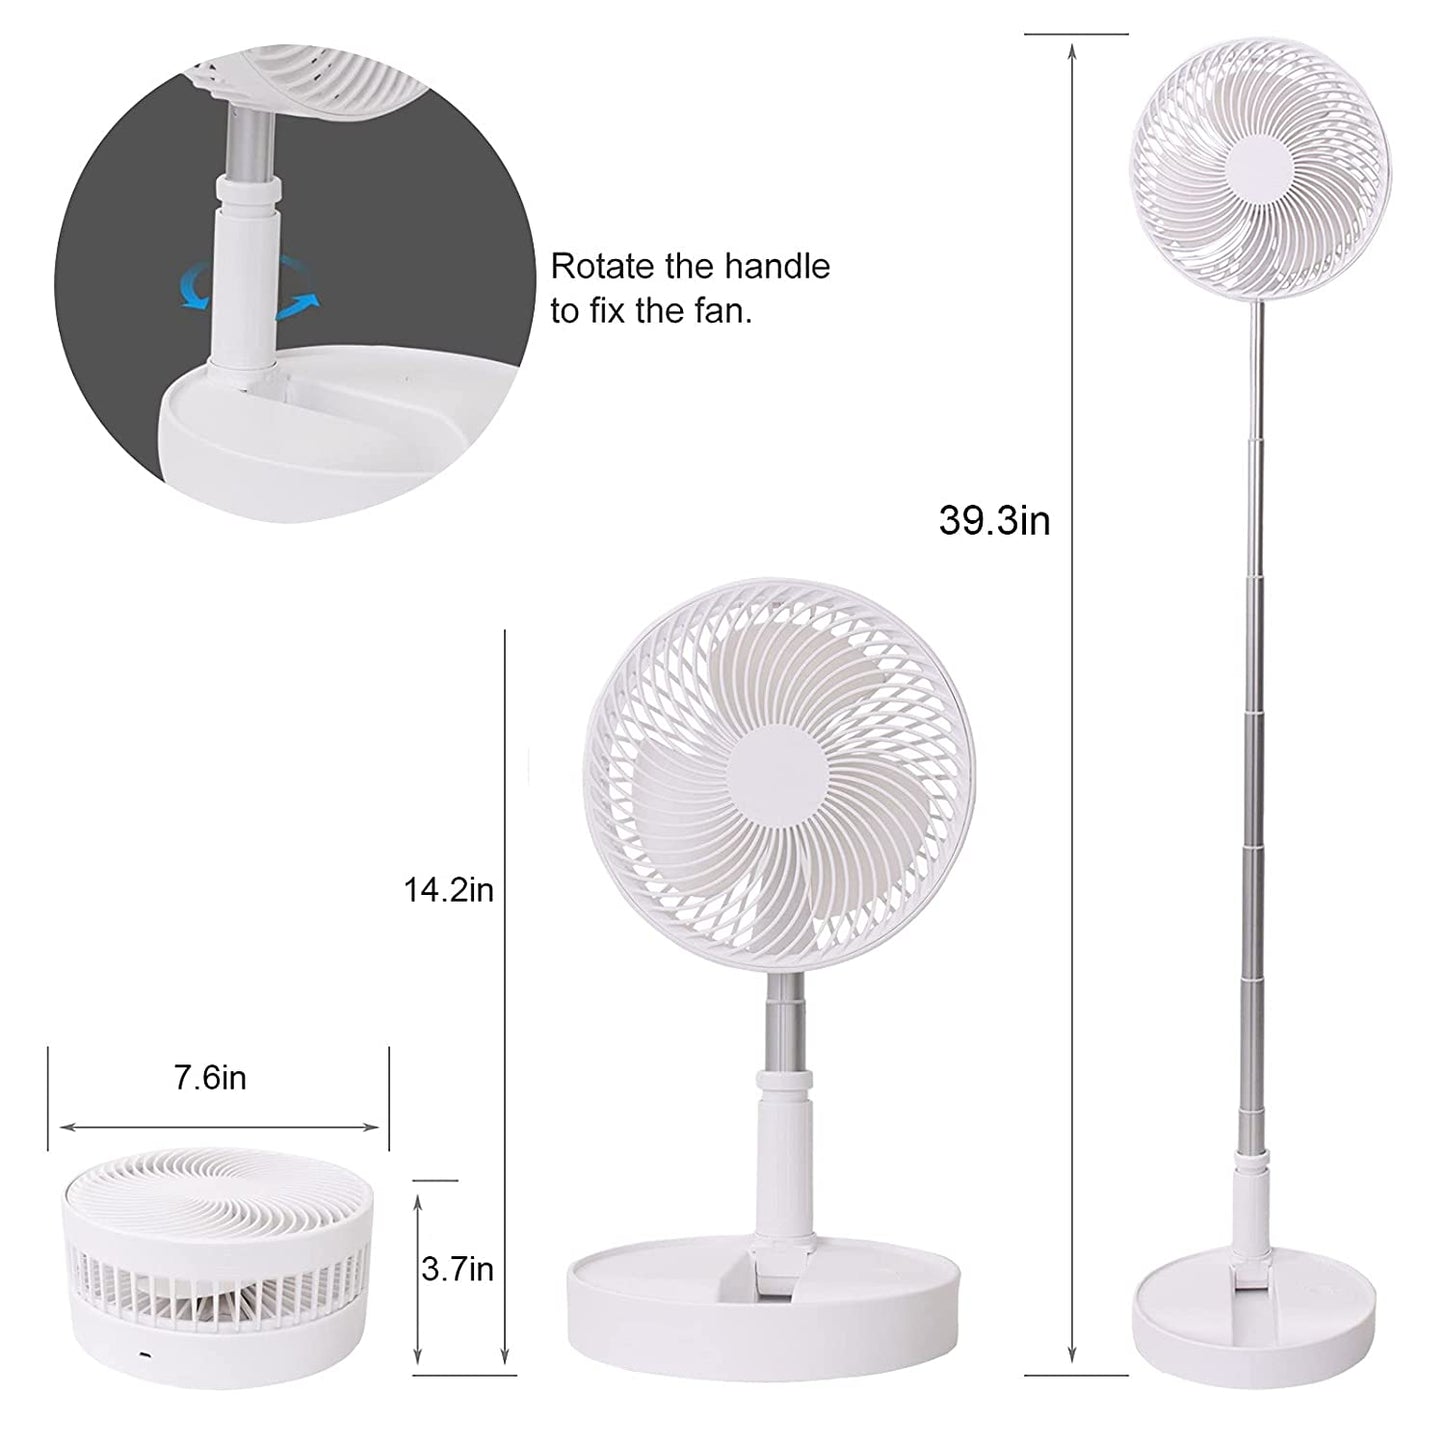 7206 TELESCOPIC ELECTRIC DESKTOP FAN, HEIGHT ADJUSTABLE, FOLDABLE & PORTABLE FOR TRAVEL/CARRY | SILENT TABLE TOP PERSONAL FAN FOR BEDSIDE, OFFICE TABLE 